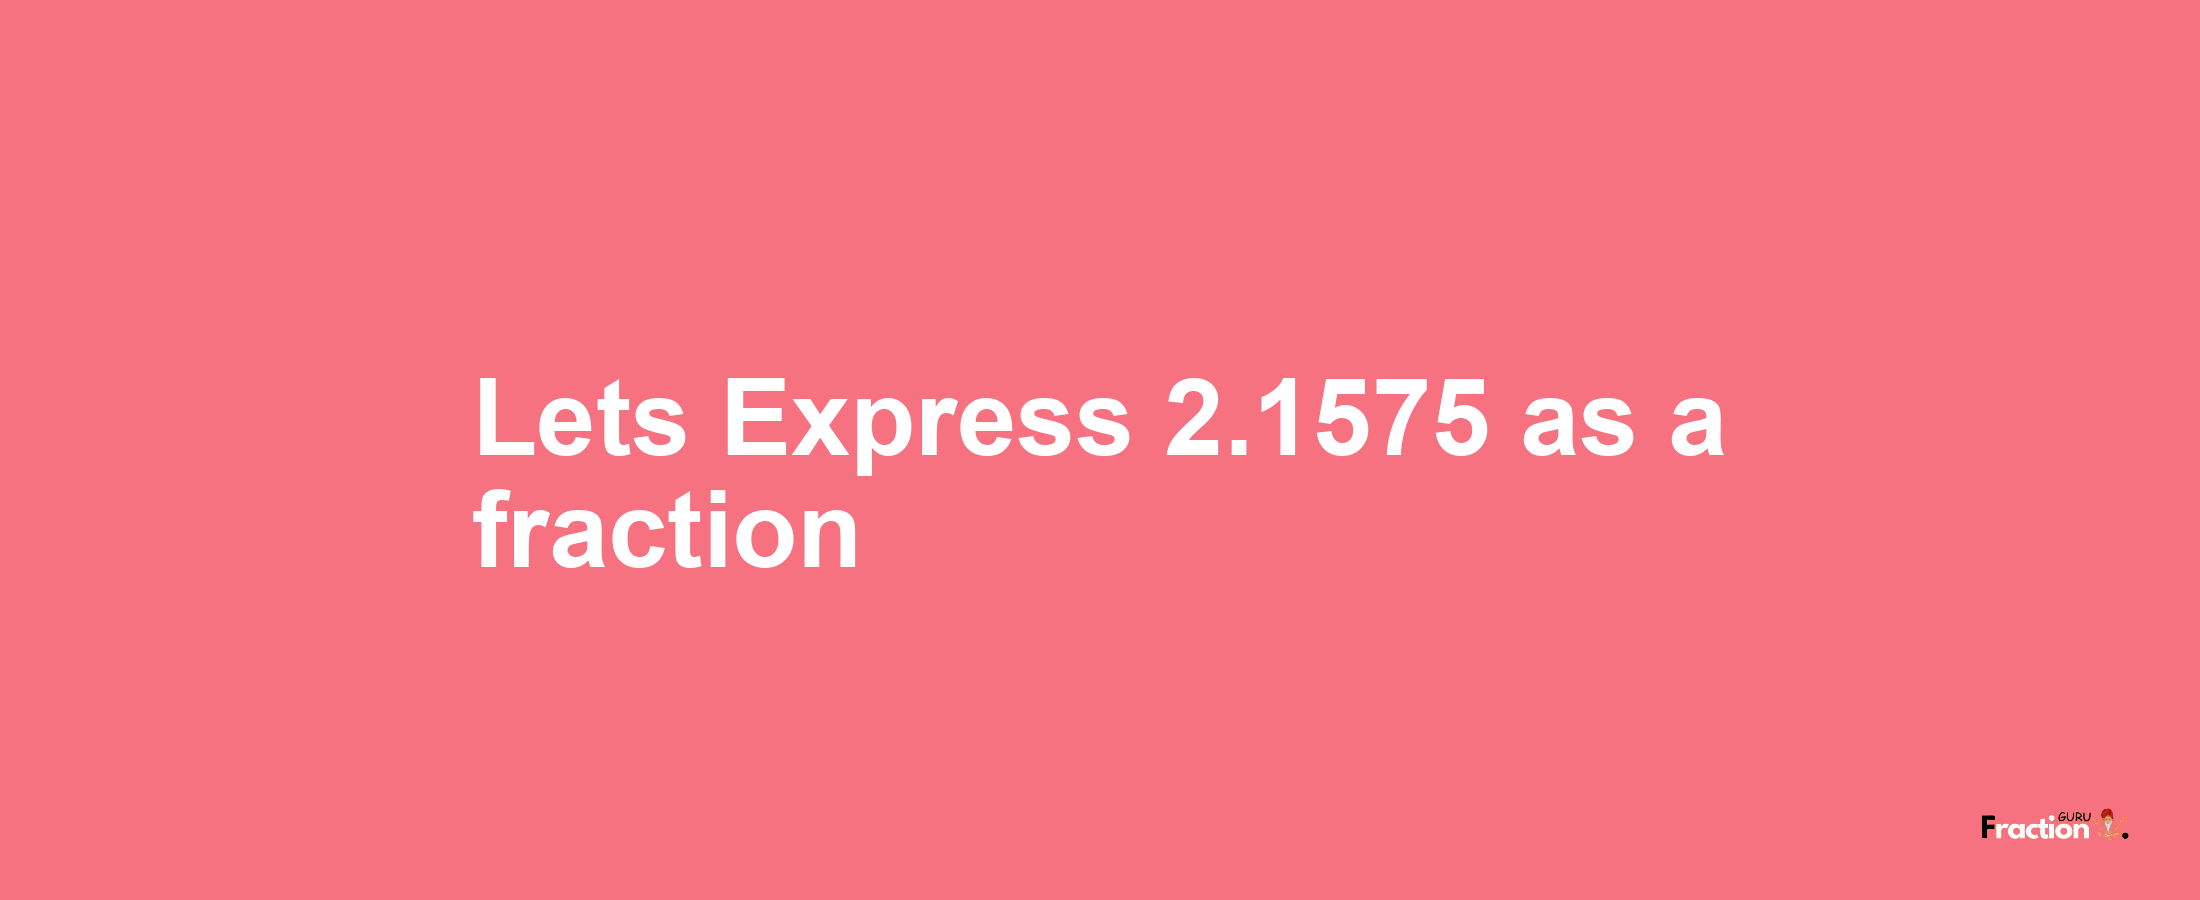 Lets Express 2.1575 as afraction